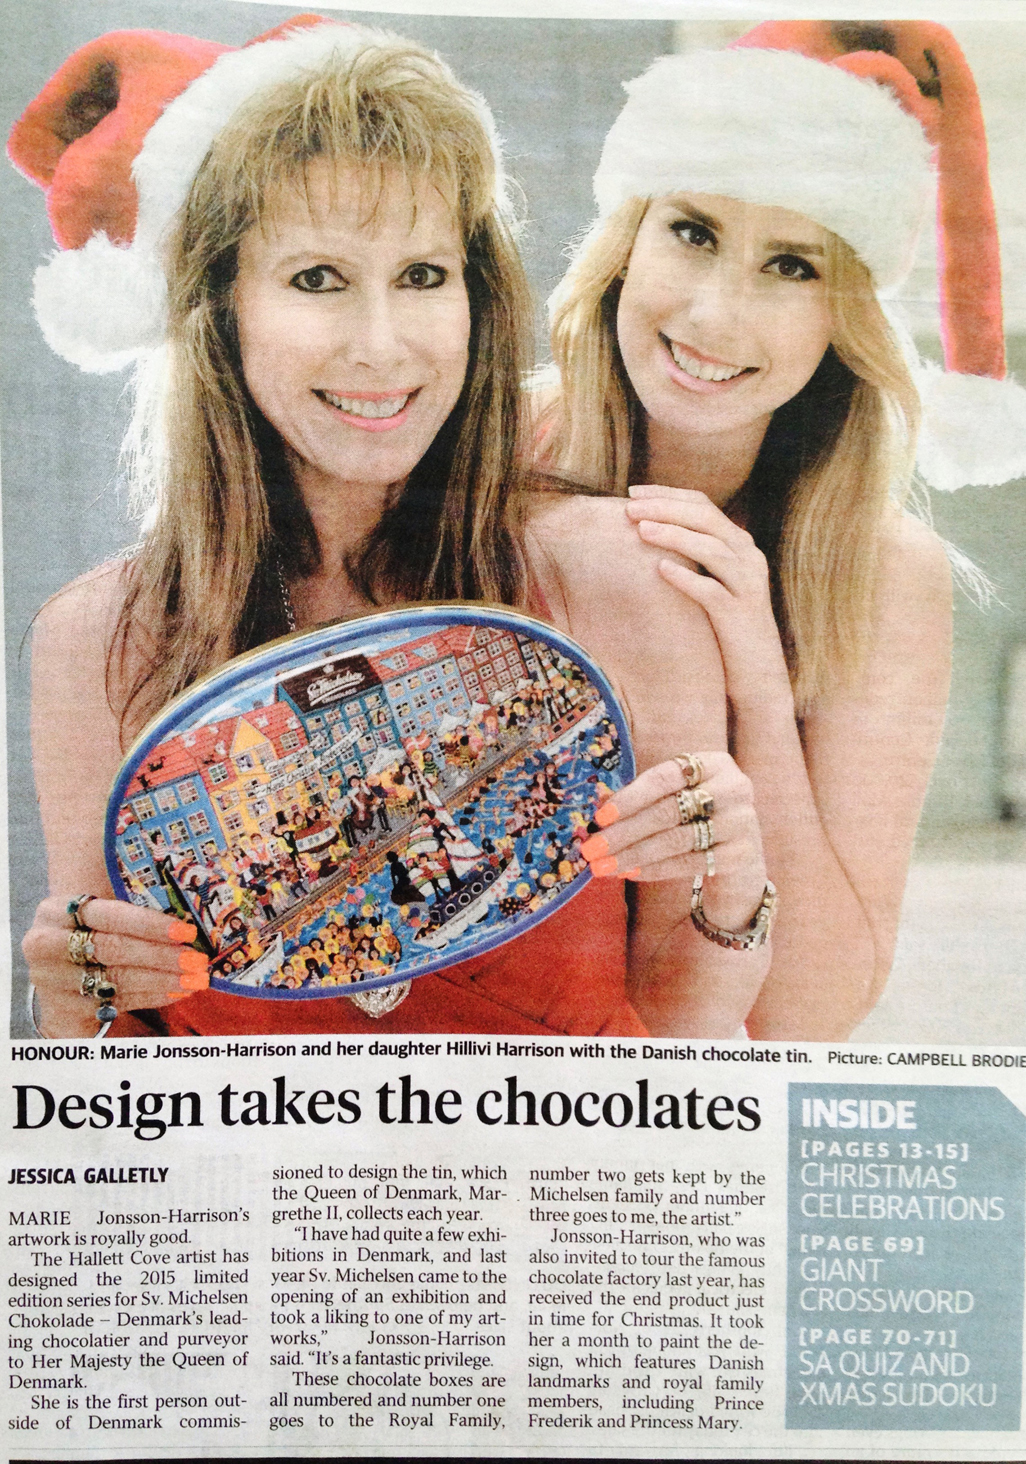 newspaper article and photo of South Australia artist Marie Jonsson-Harrison and daughter Hillivi Harrison with Sv Michelsen chocolate box from Denmark